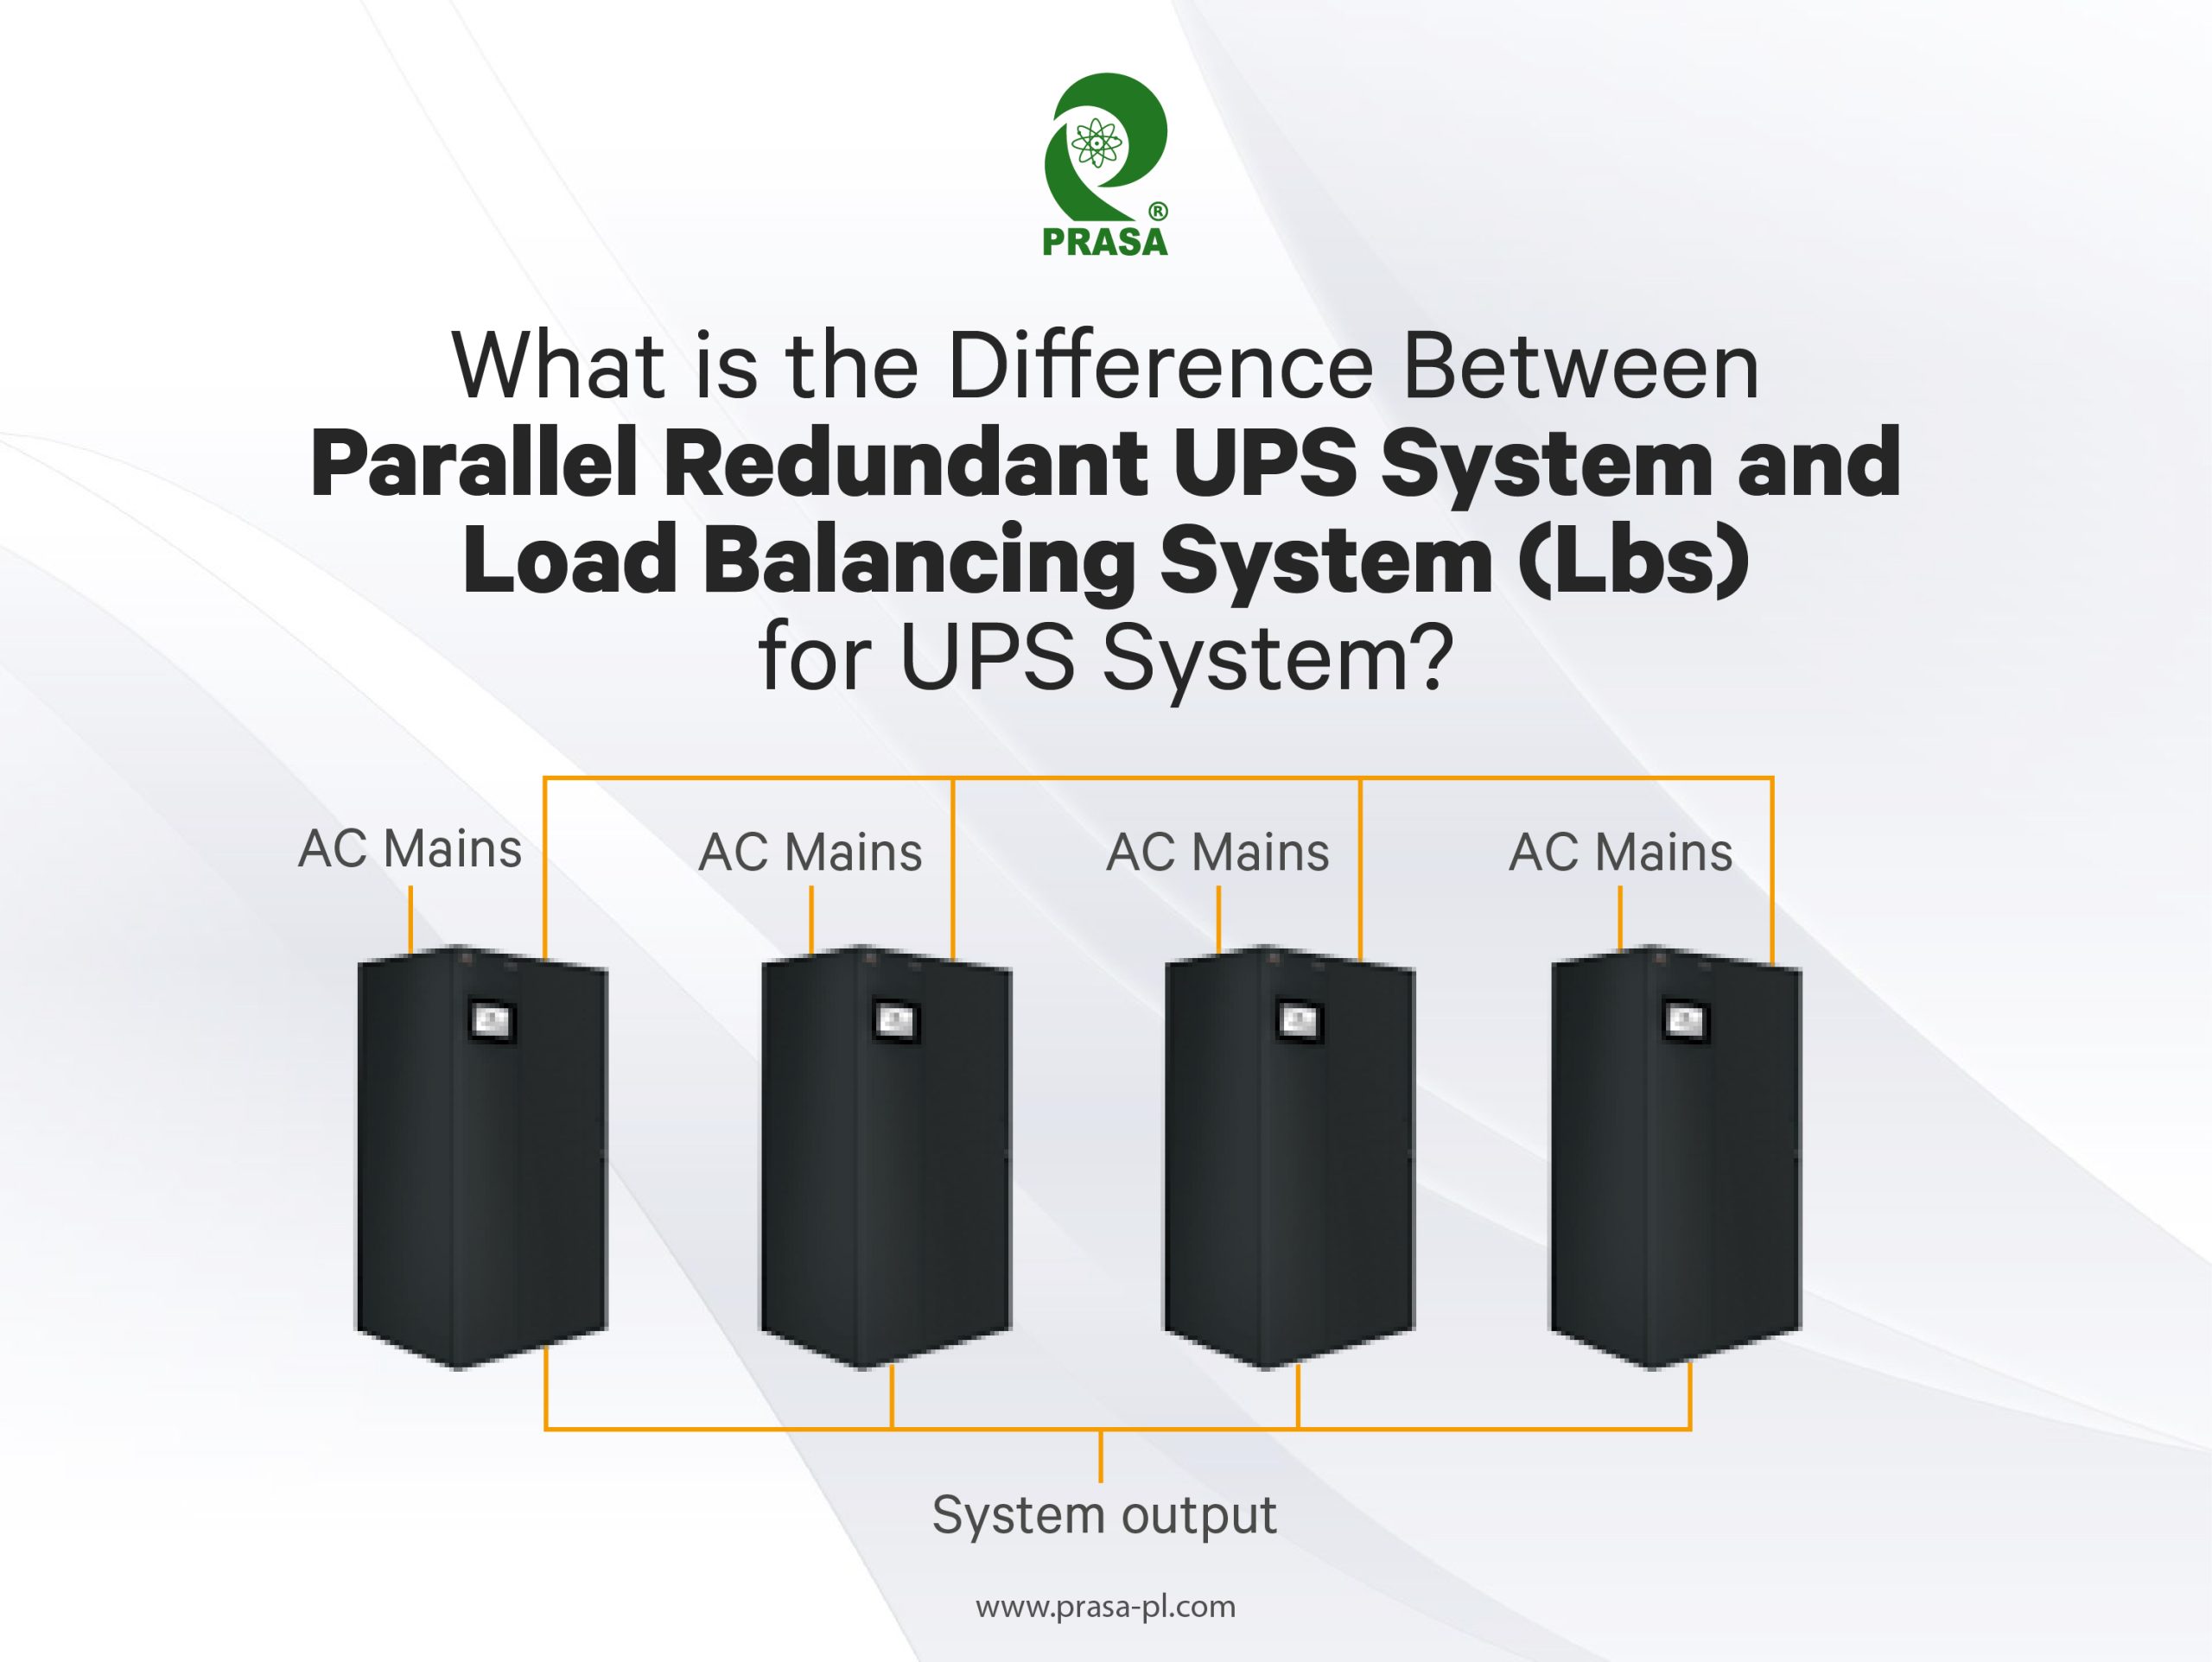 What is the difference between parallel redundant UPS system and load balancing system (LBS) for UPS system?